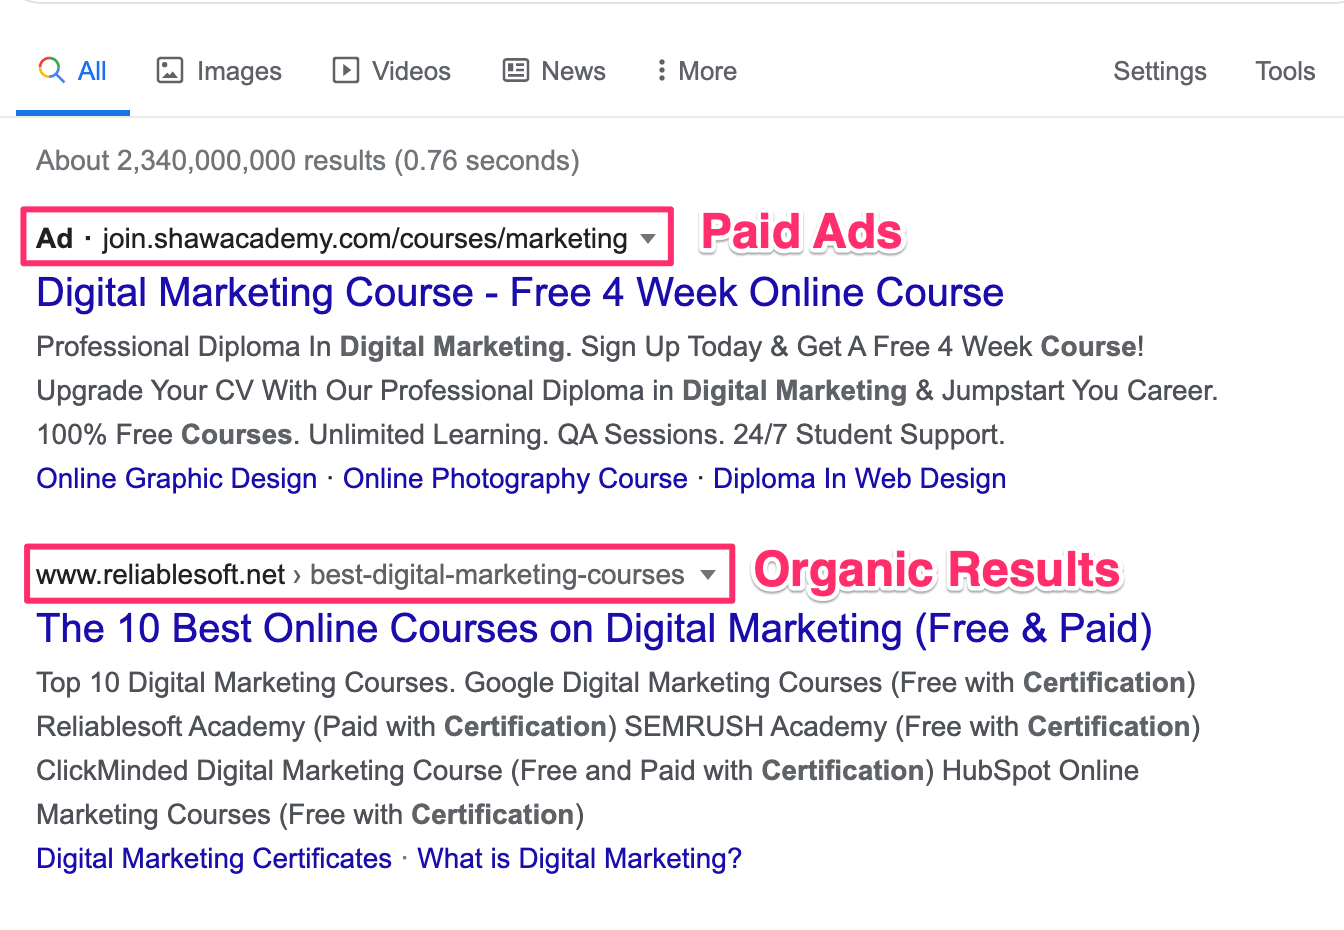 Paid Ads in Google Results